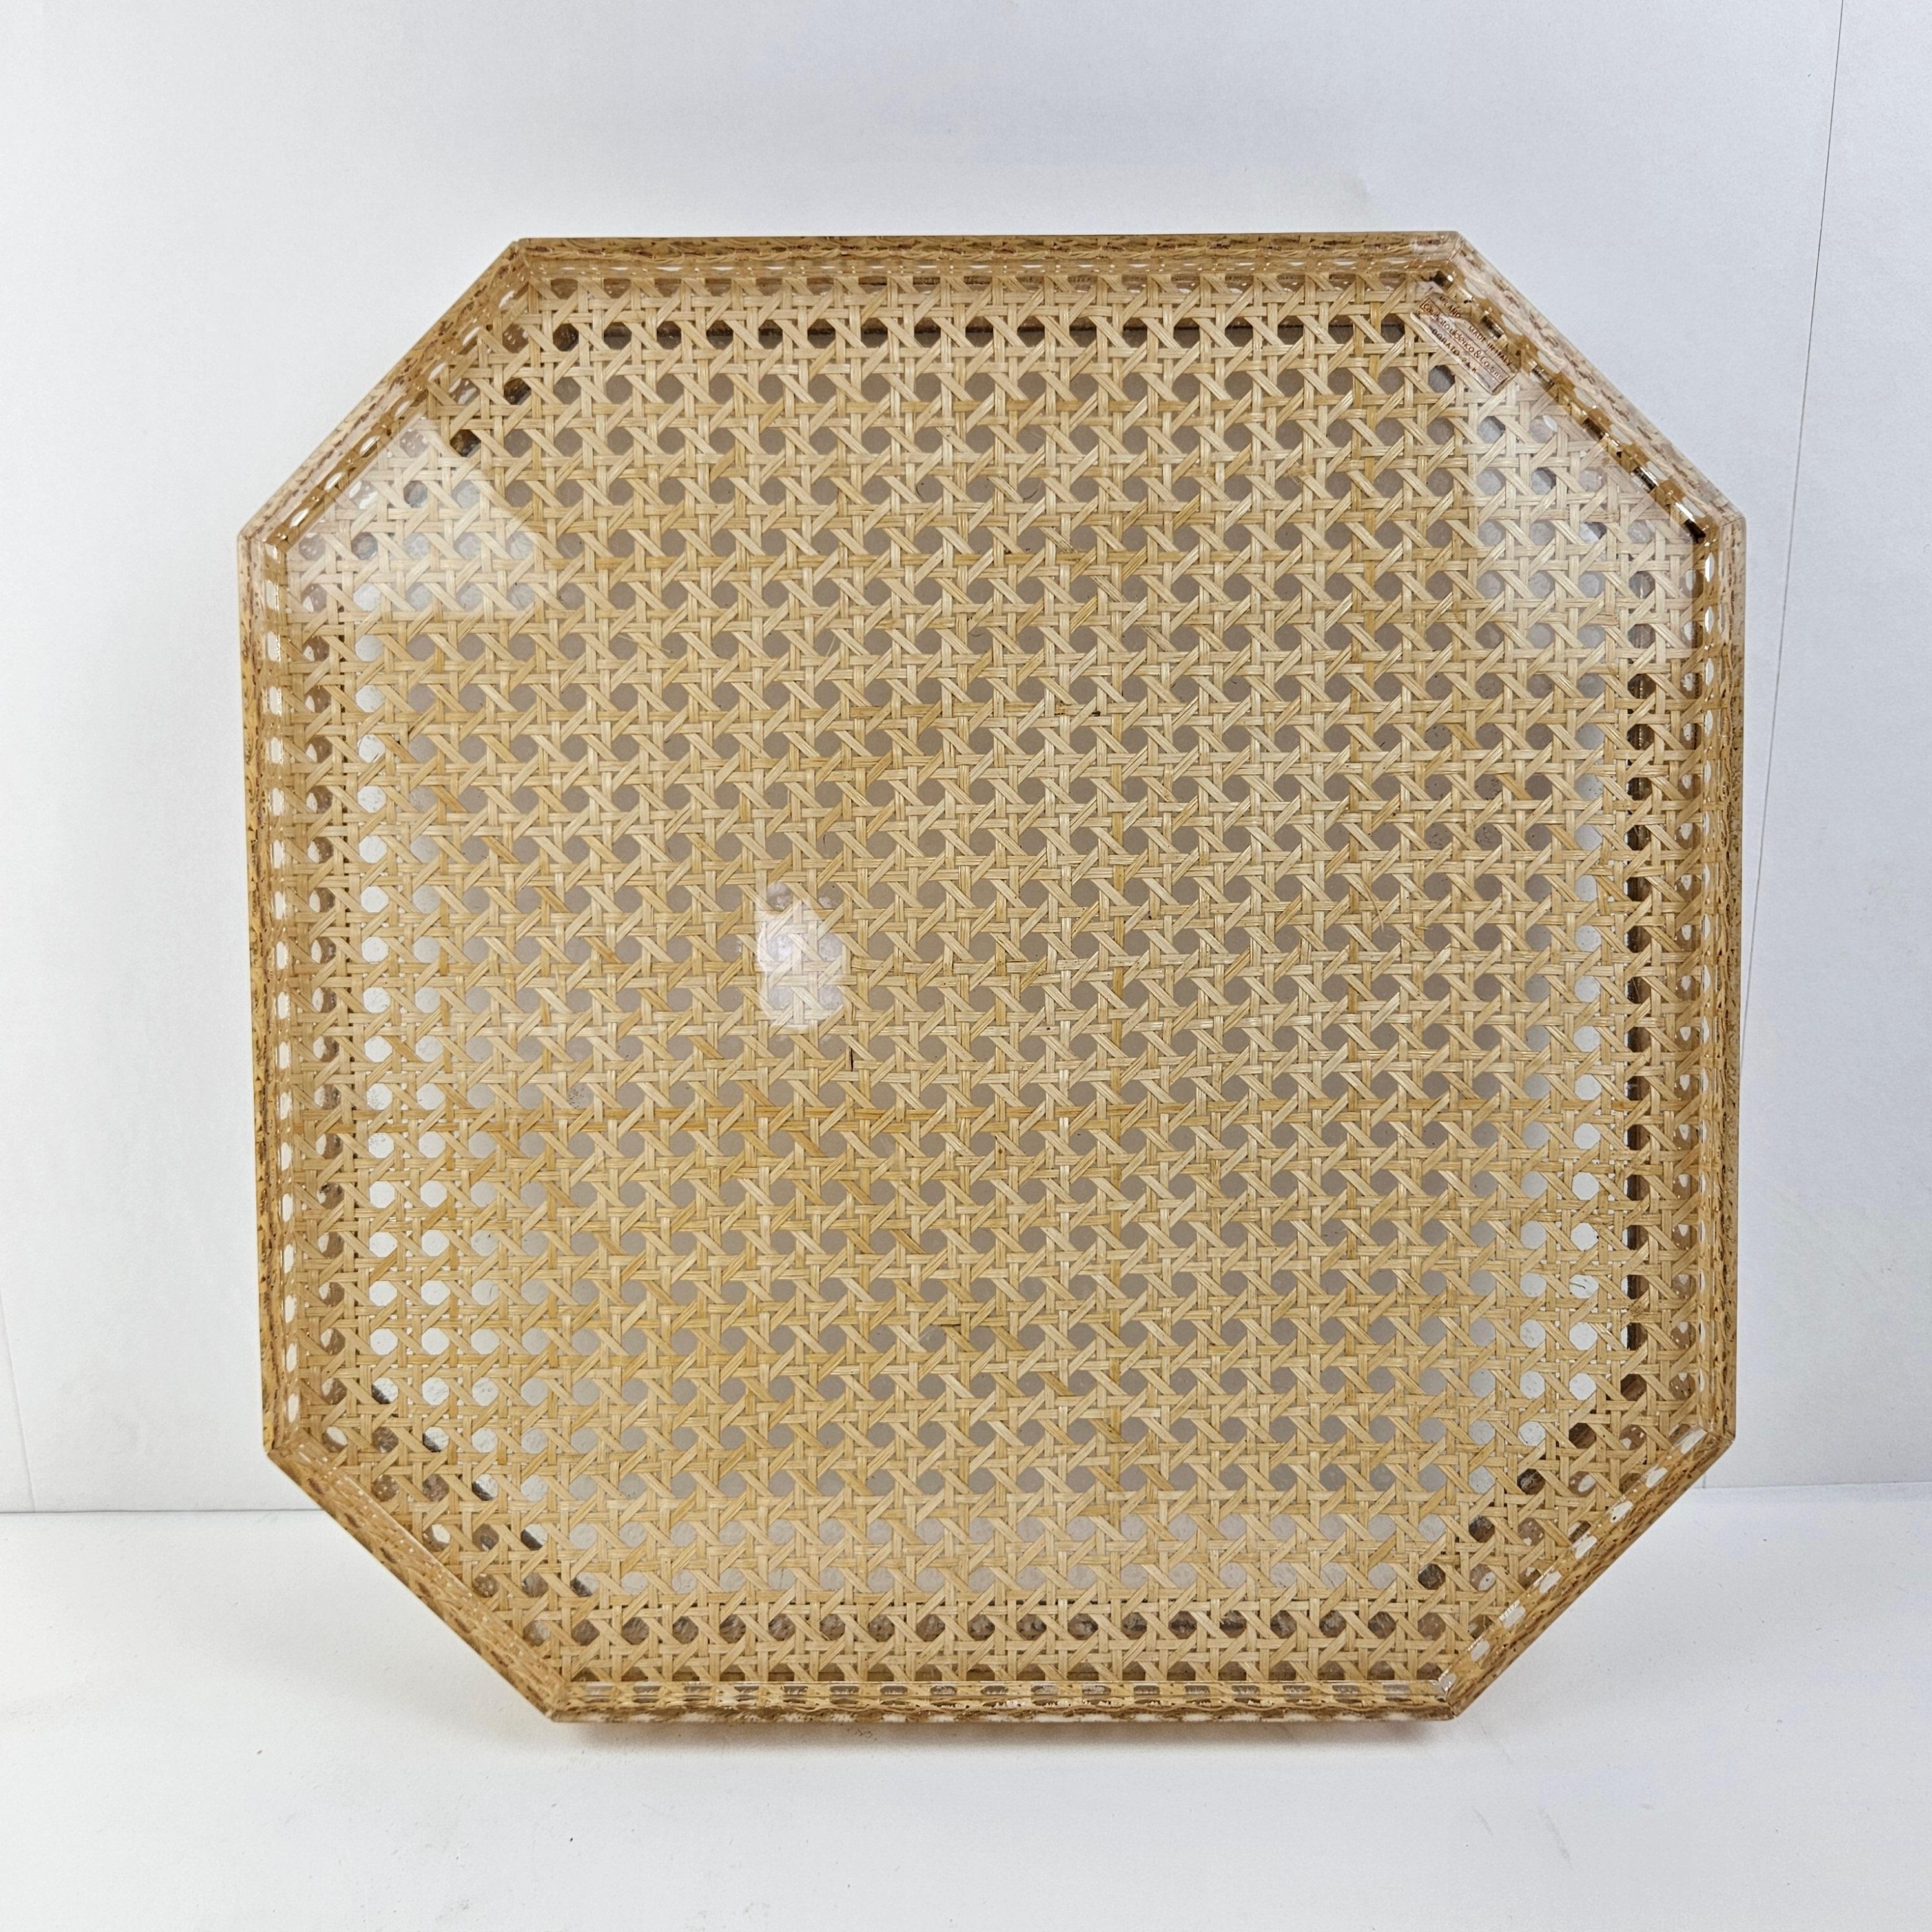 Hand-Crafted Serving Tray in Lucite, Rattan and 24k Gold, Italy 1970s For Sale